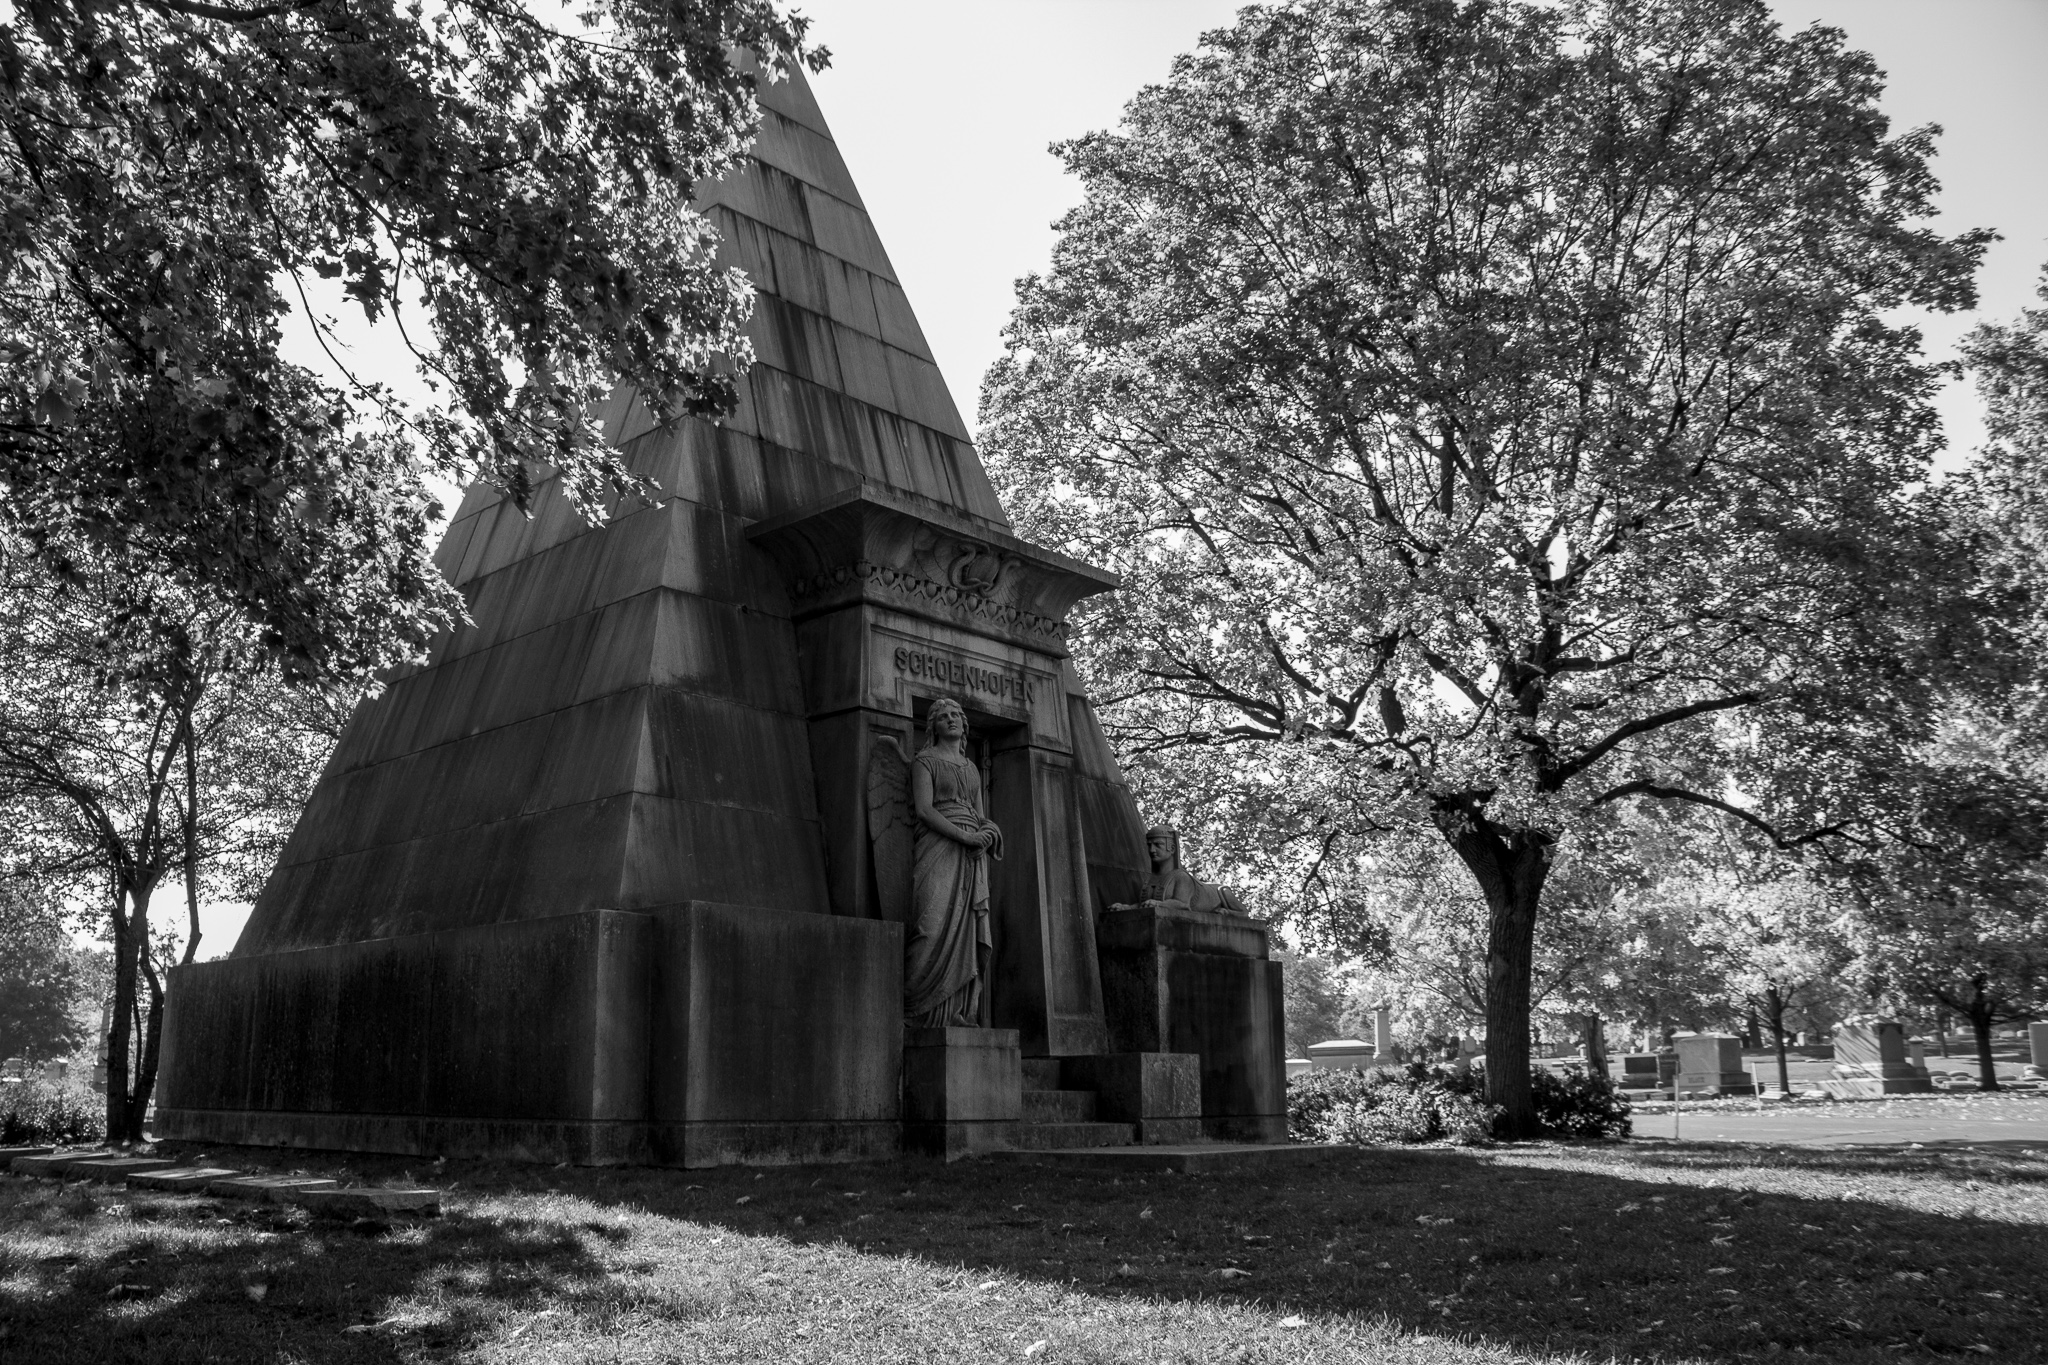 Black-and-white image of a pyramid tomb edged with large branching trees